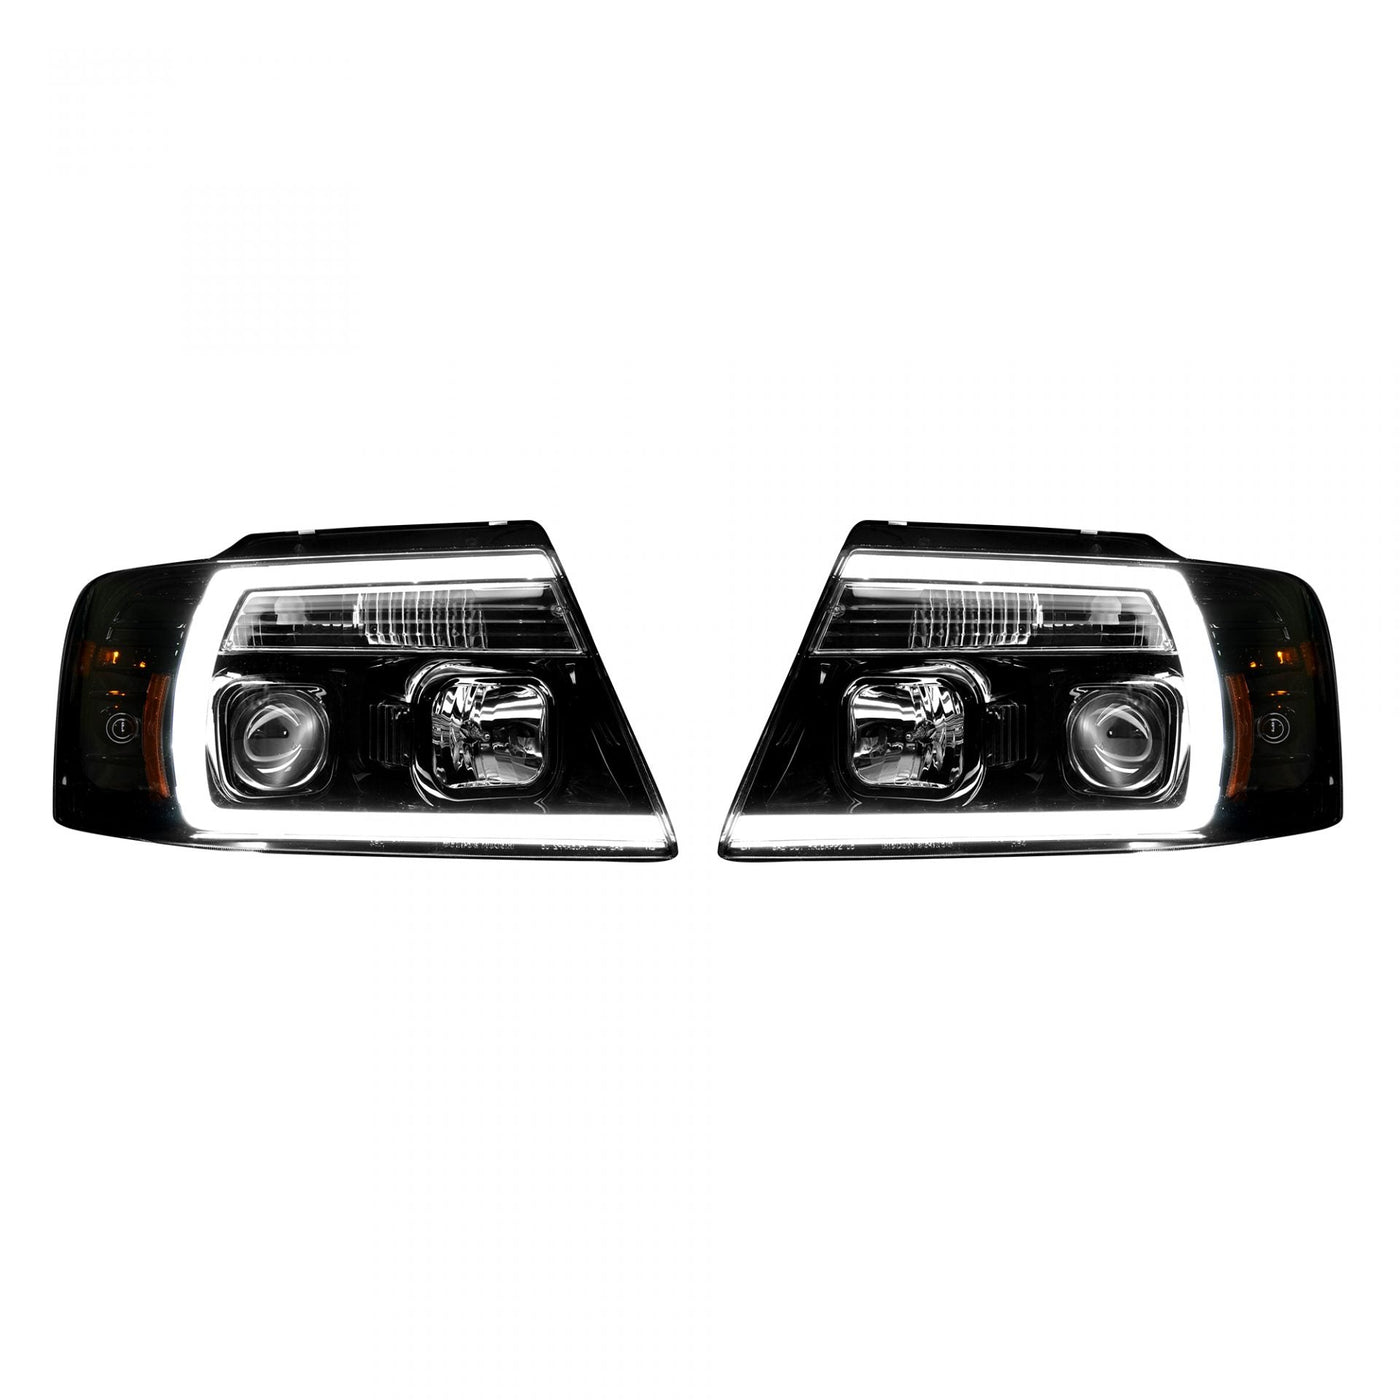 Ford Projector Headlights, F150 Projector Headlights, F150 04-08 Projector Headlights, Smoked/Black Headlights, Recon Projector Headlights